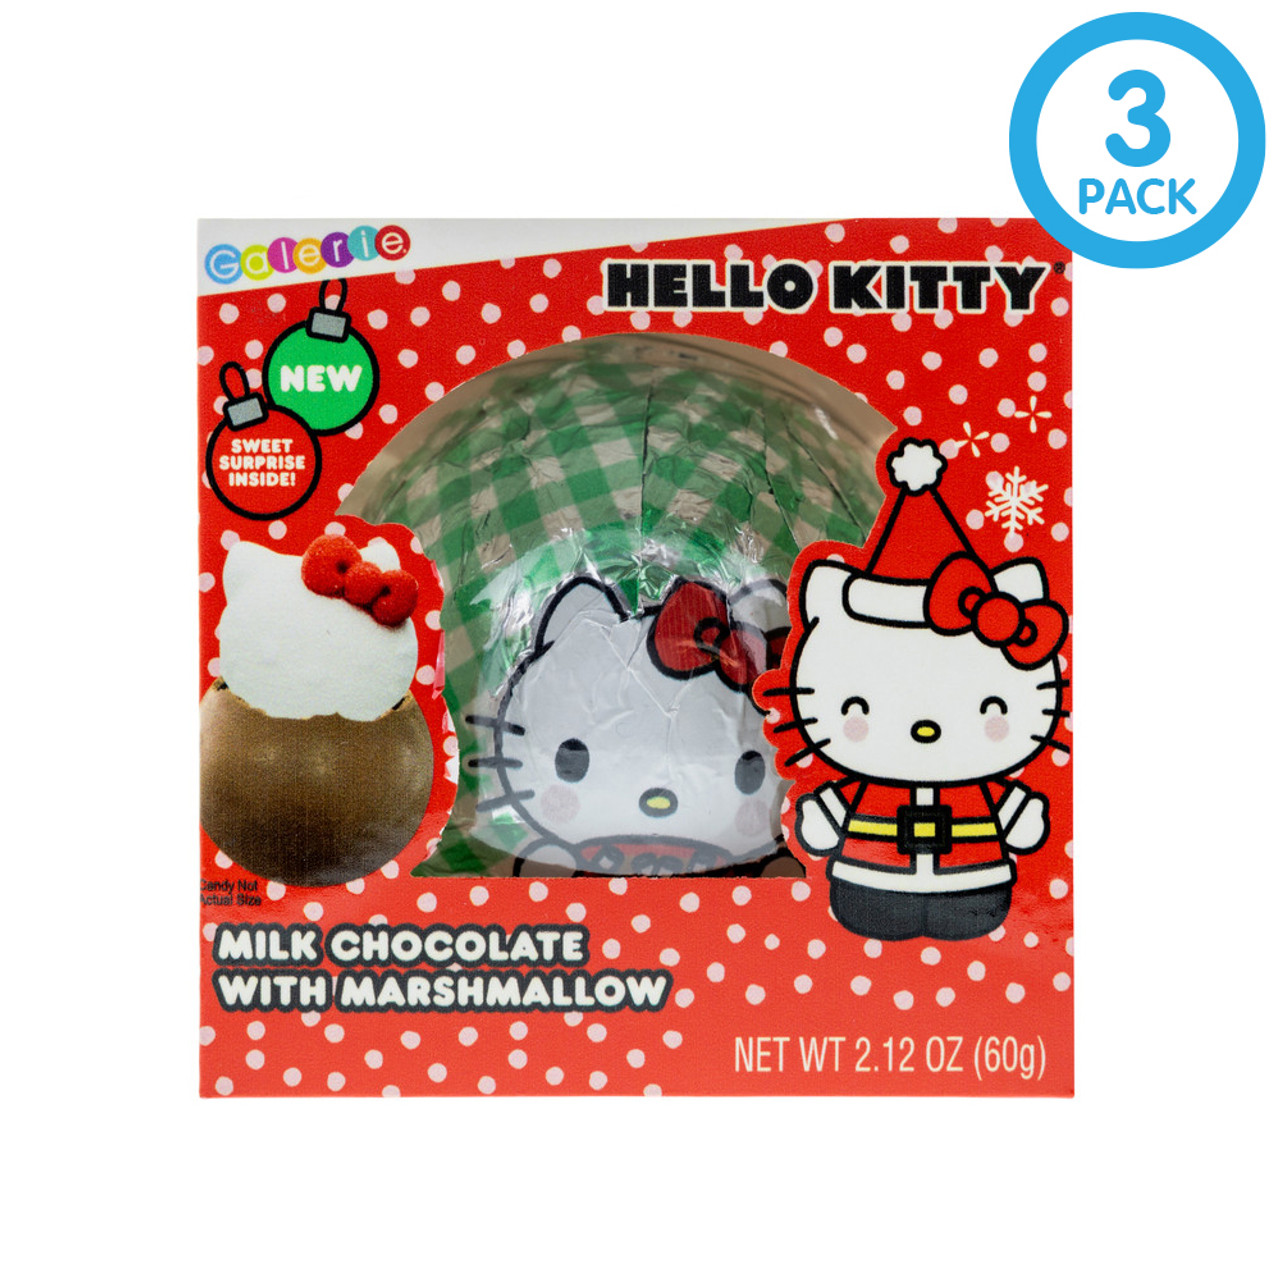 Hello Kitty is not a cat? - CNET, hello kitty 